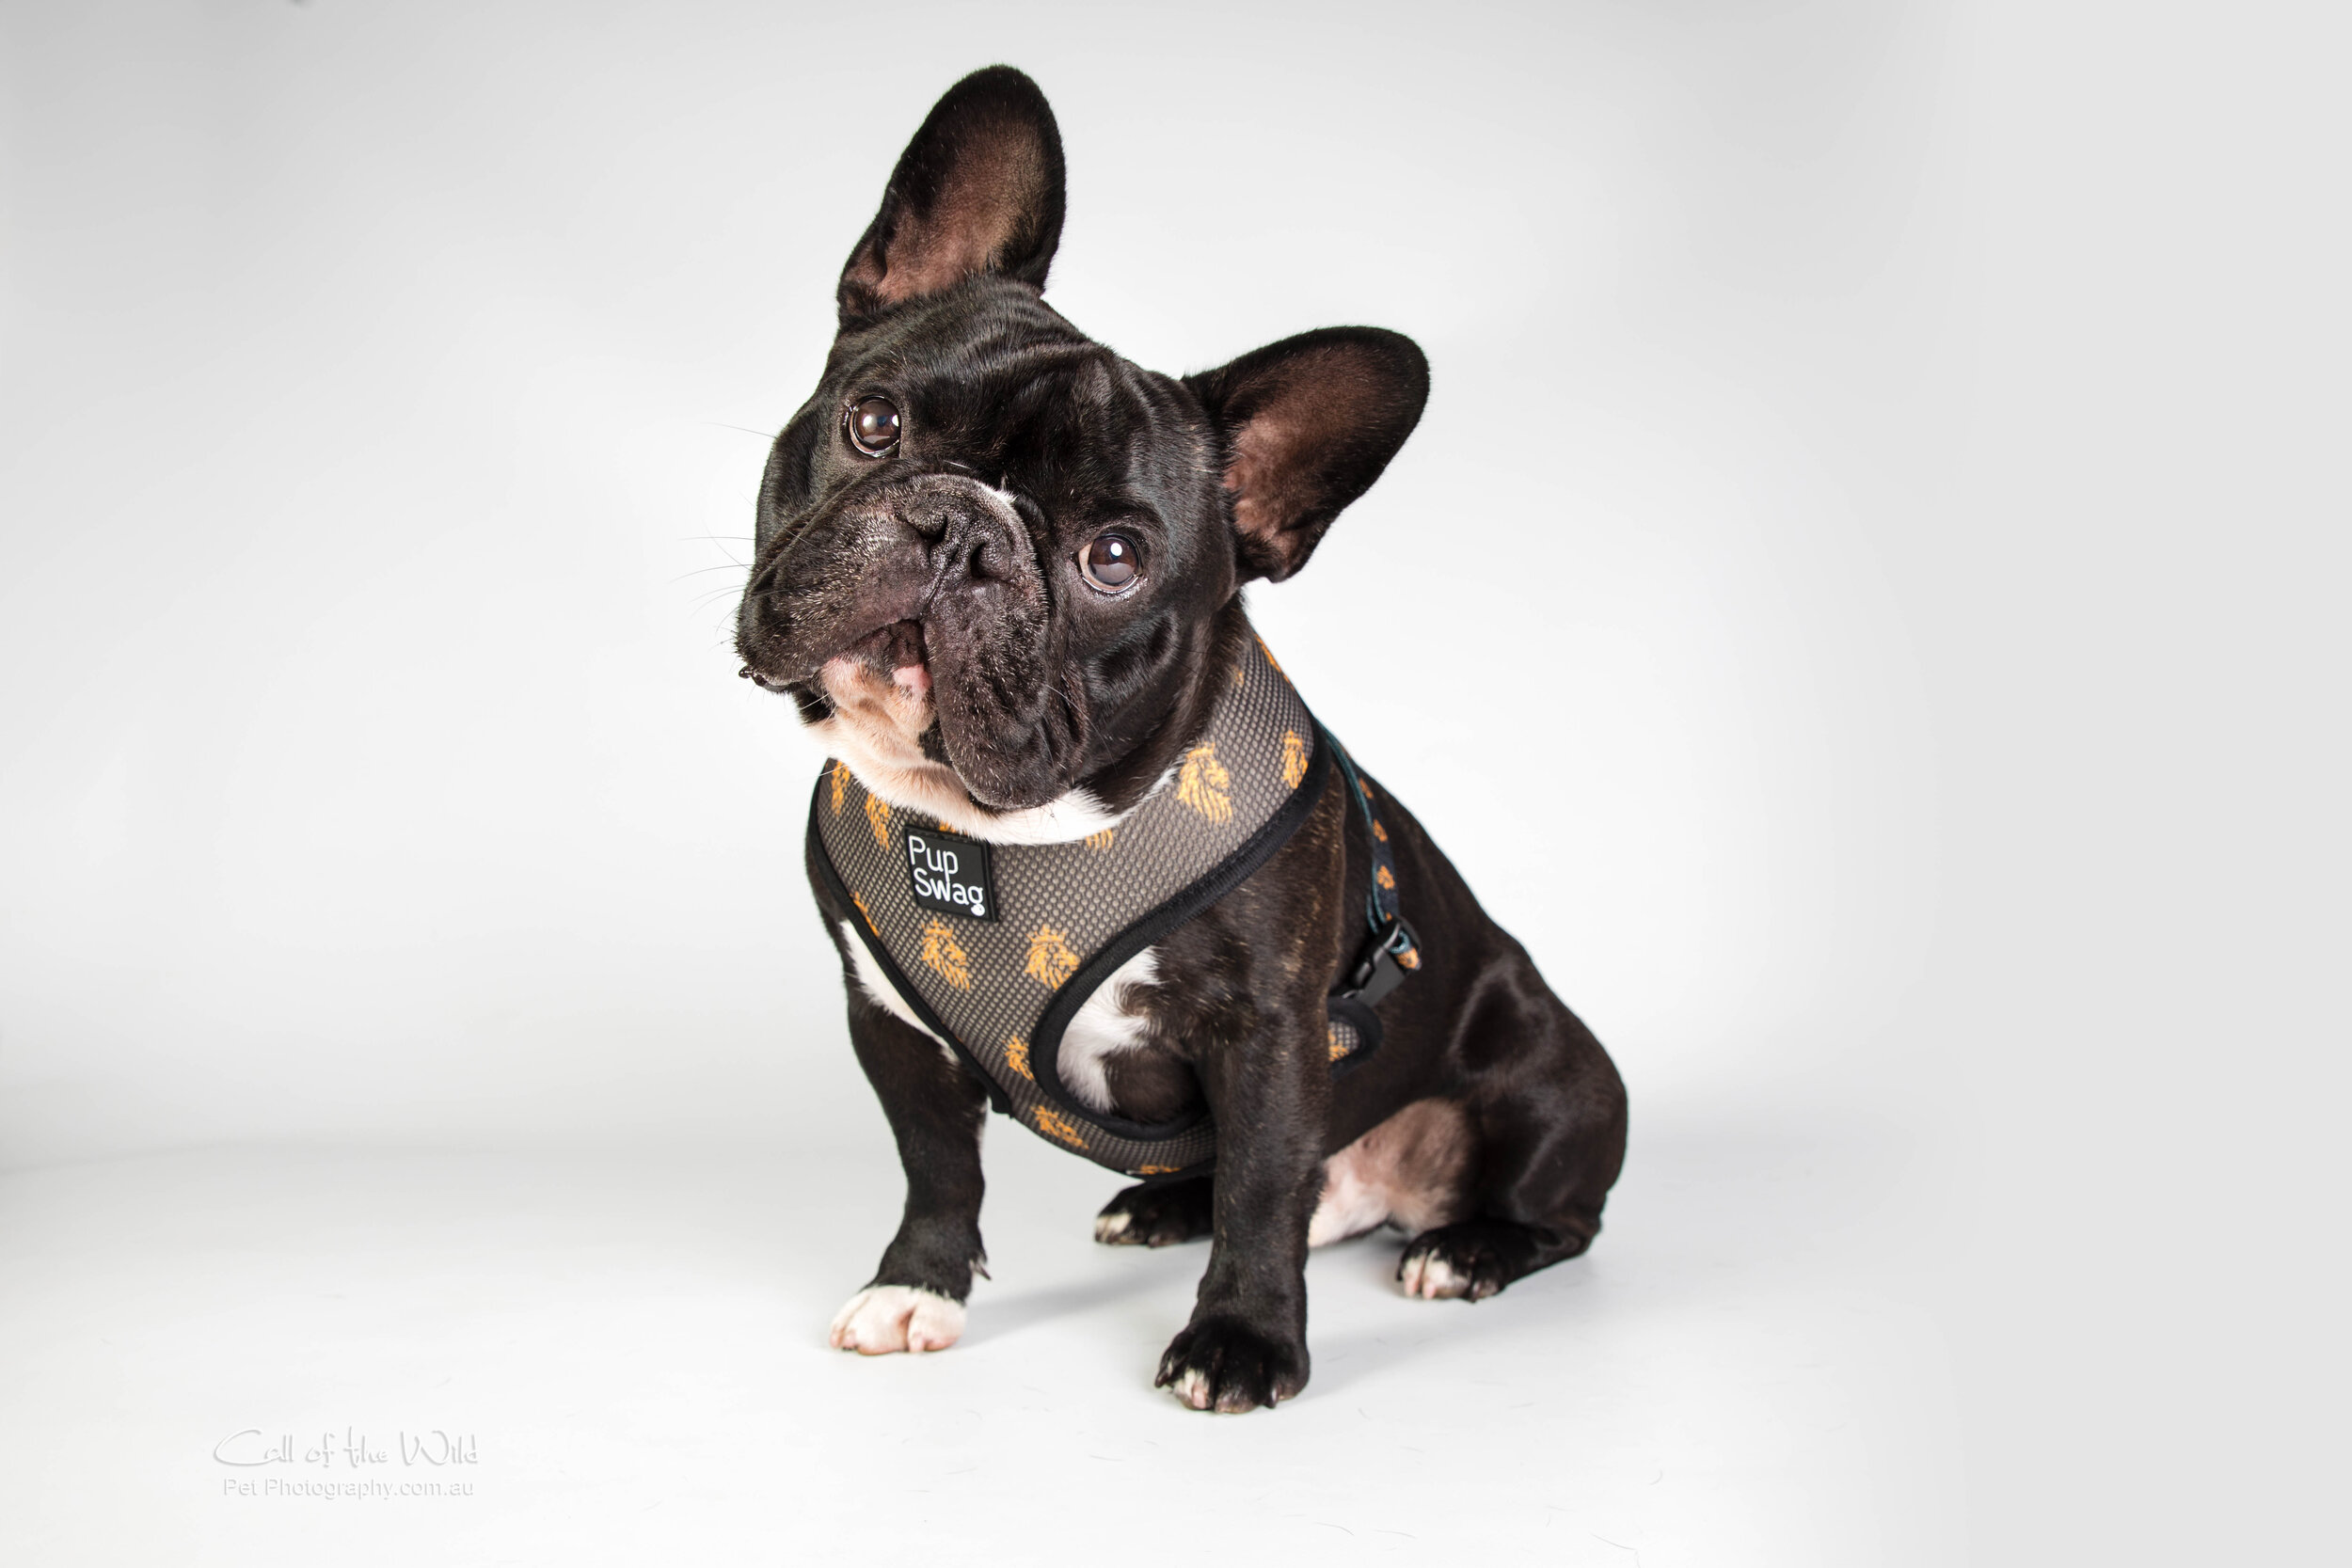  Pet Product Photography 